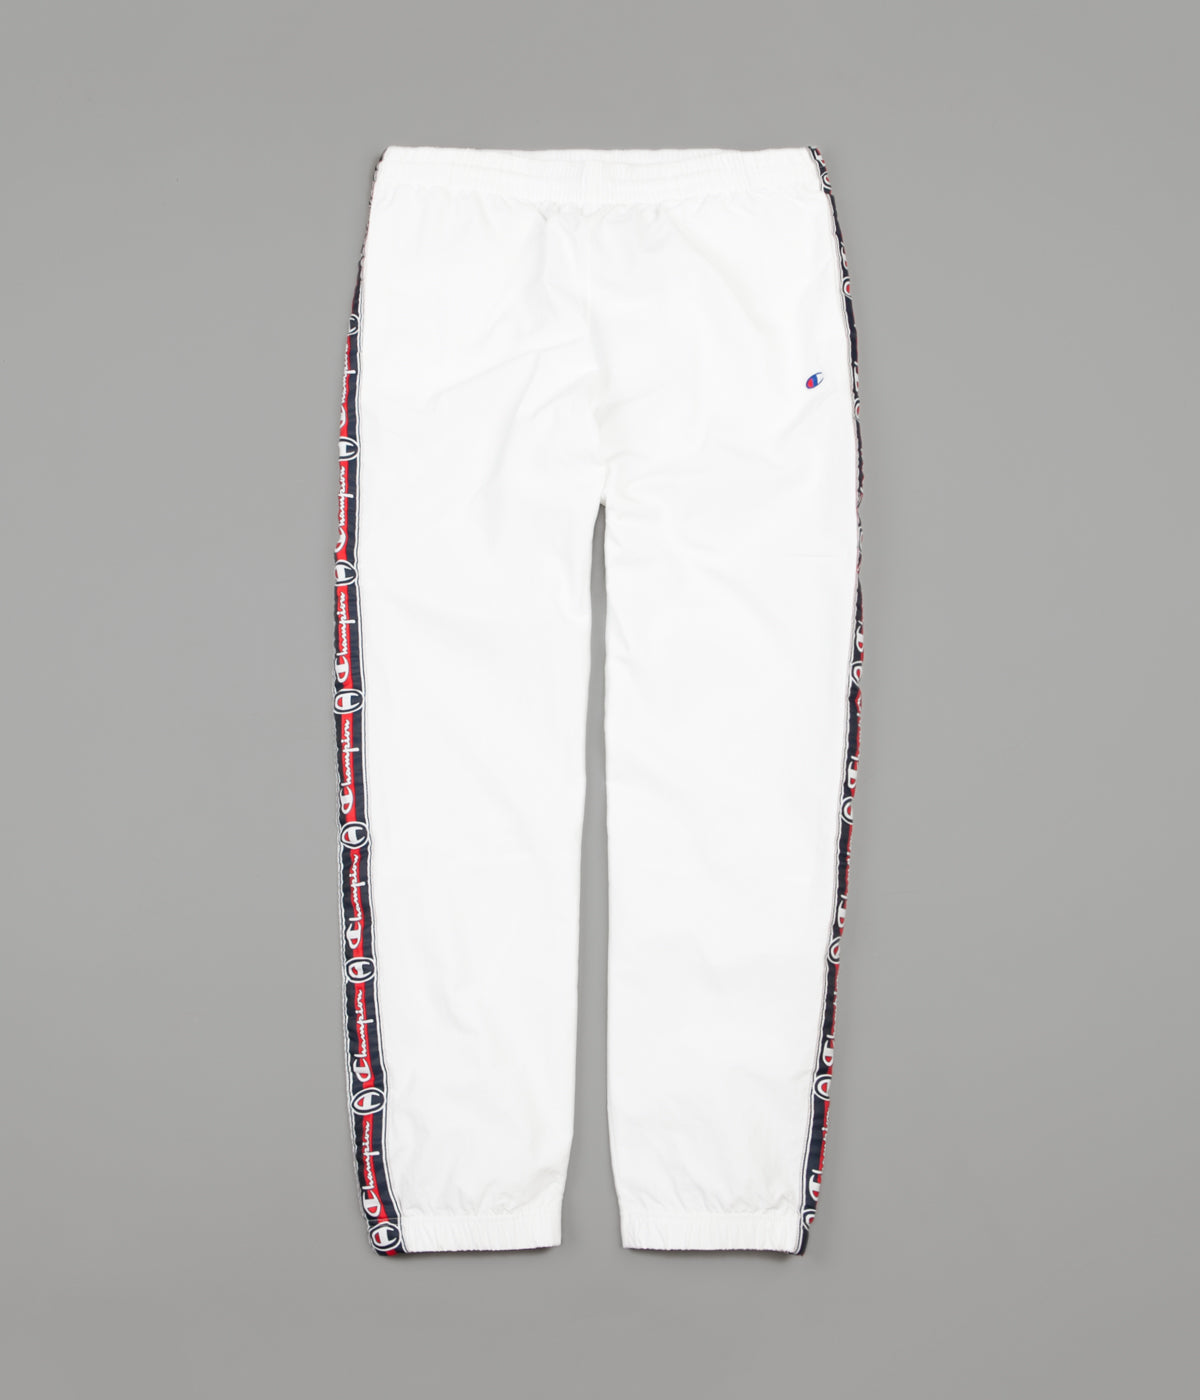 champion sweatpants with logo on side